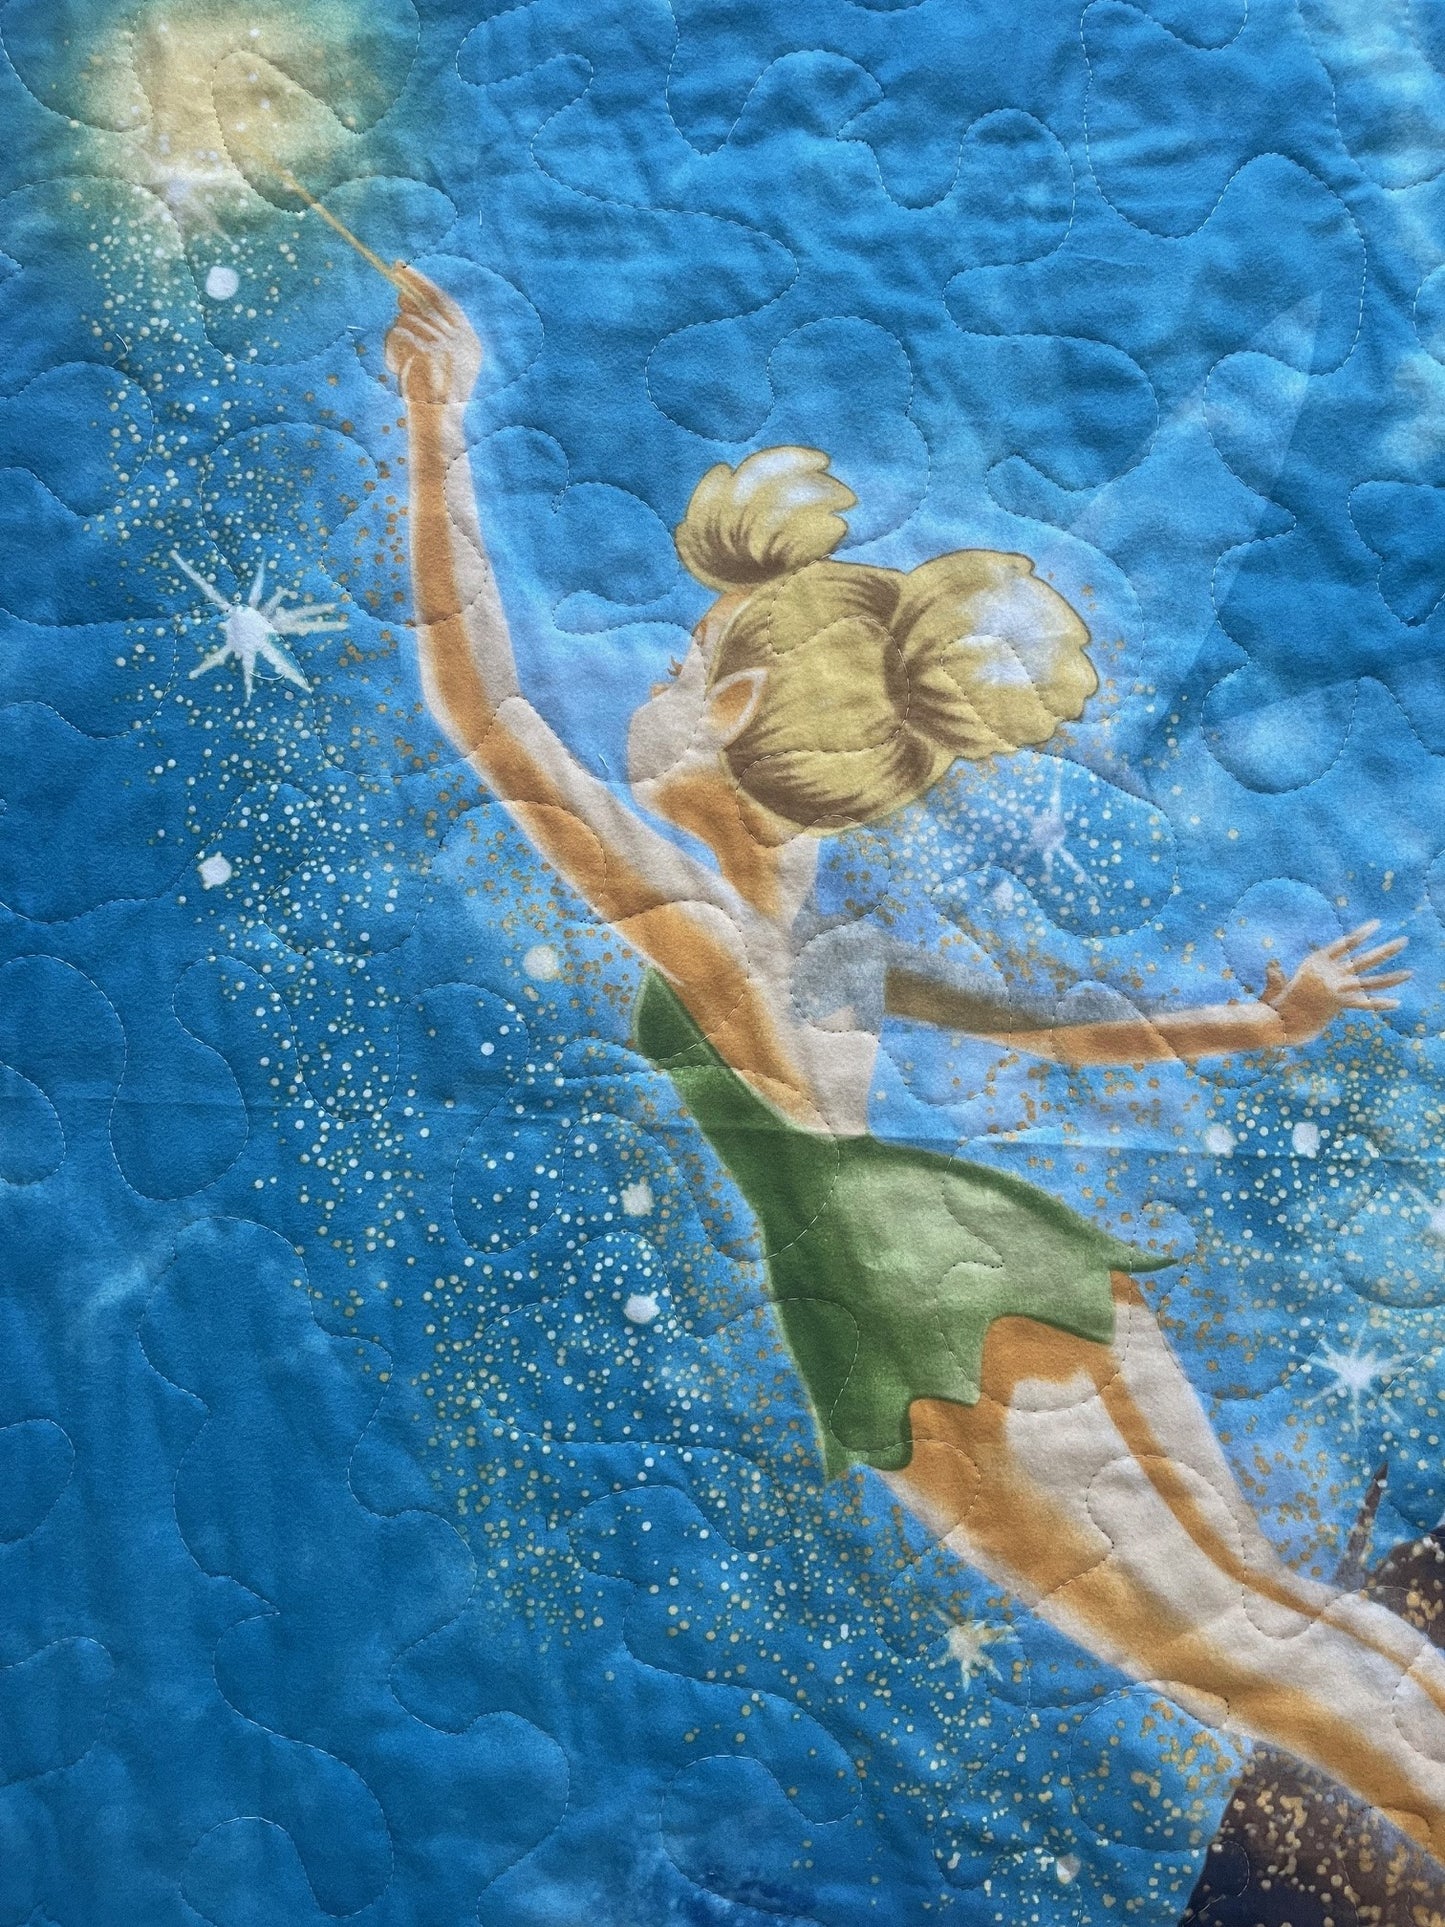 DISNEY PETER PAN'S TINKER BELL "FLY TO NEVERLAND" QUILTED BLANKET